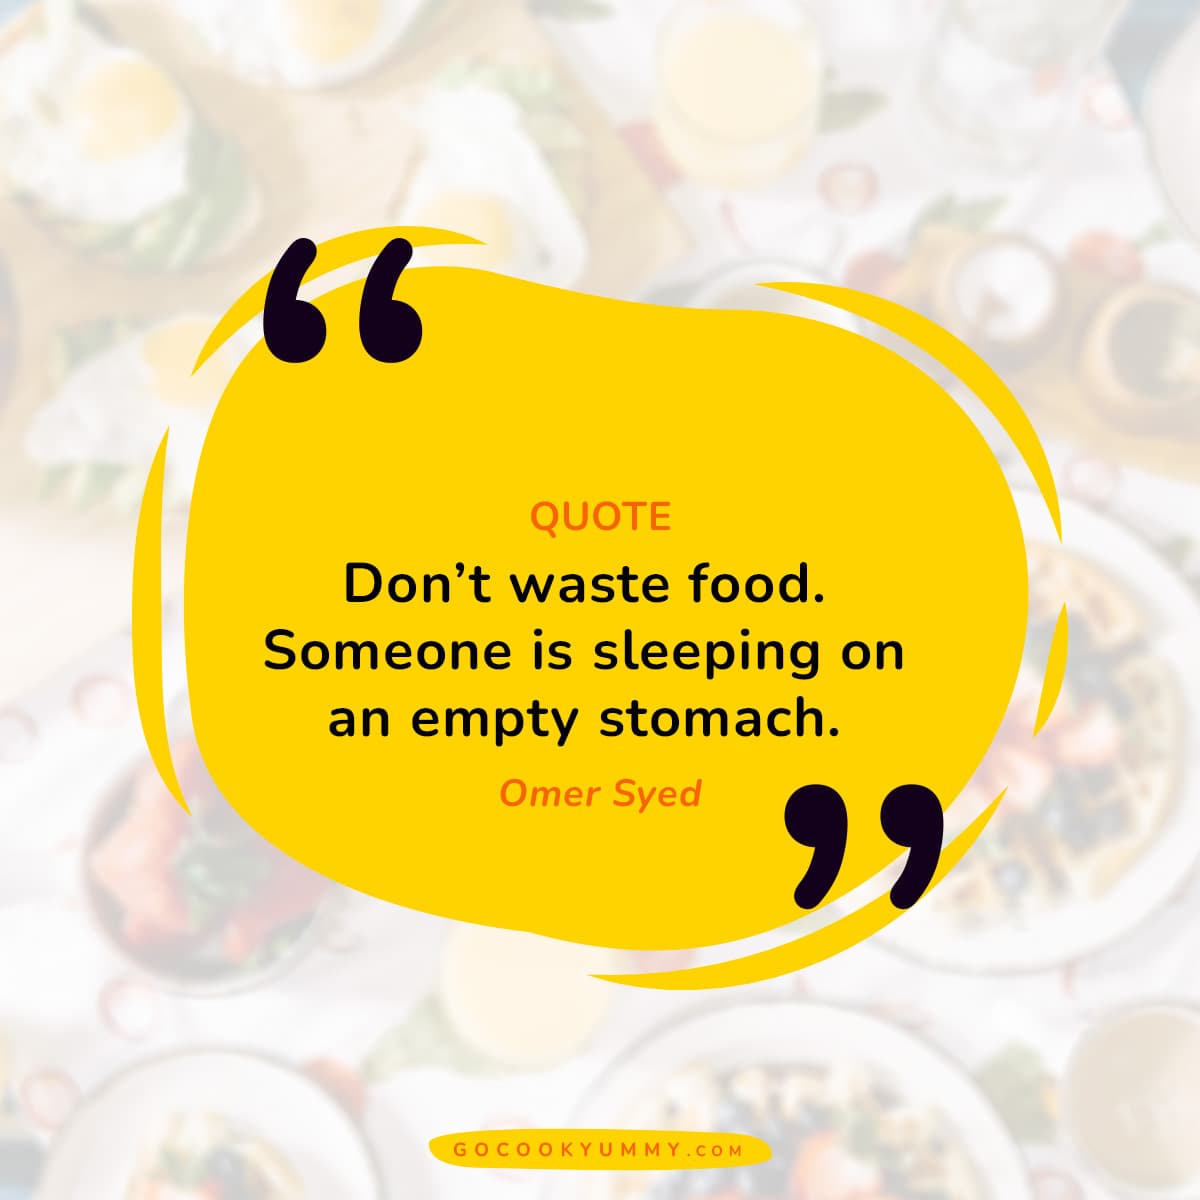 Don't waste food. Someone is sleeping on empty stomach.